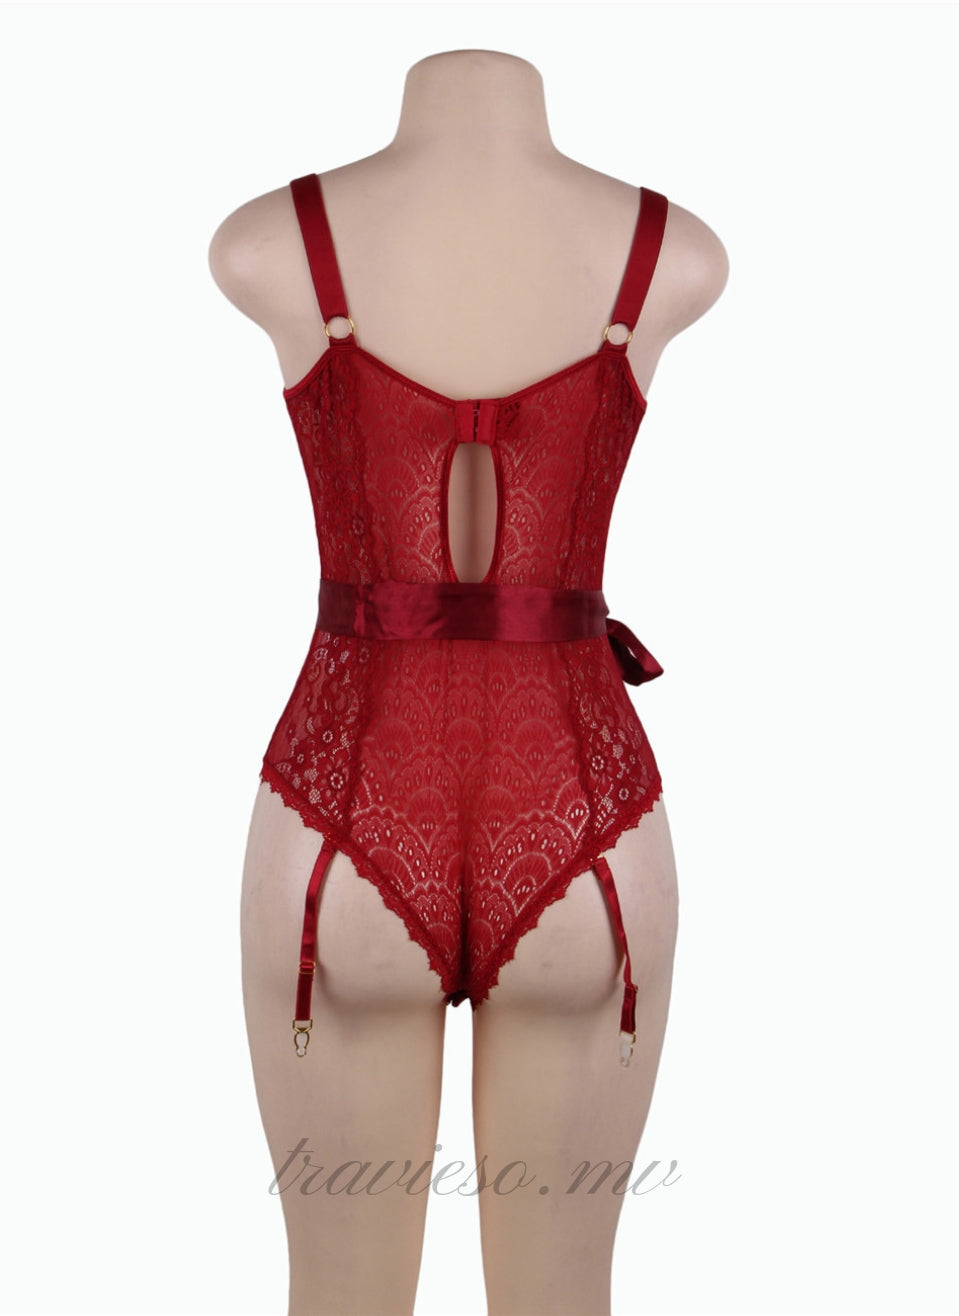 Exquisite pattern Lace Teddy